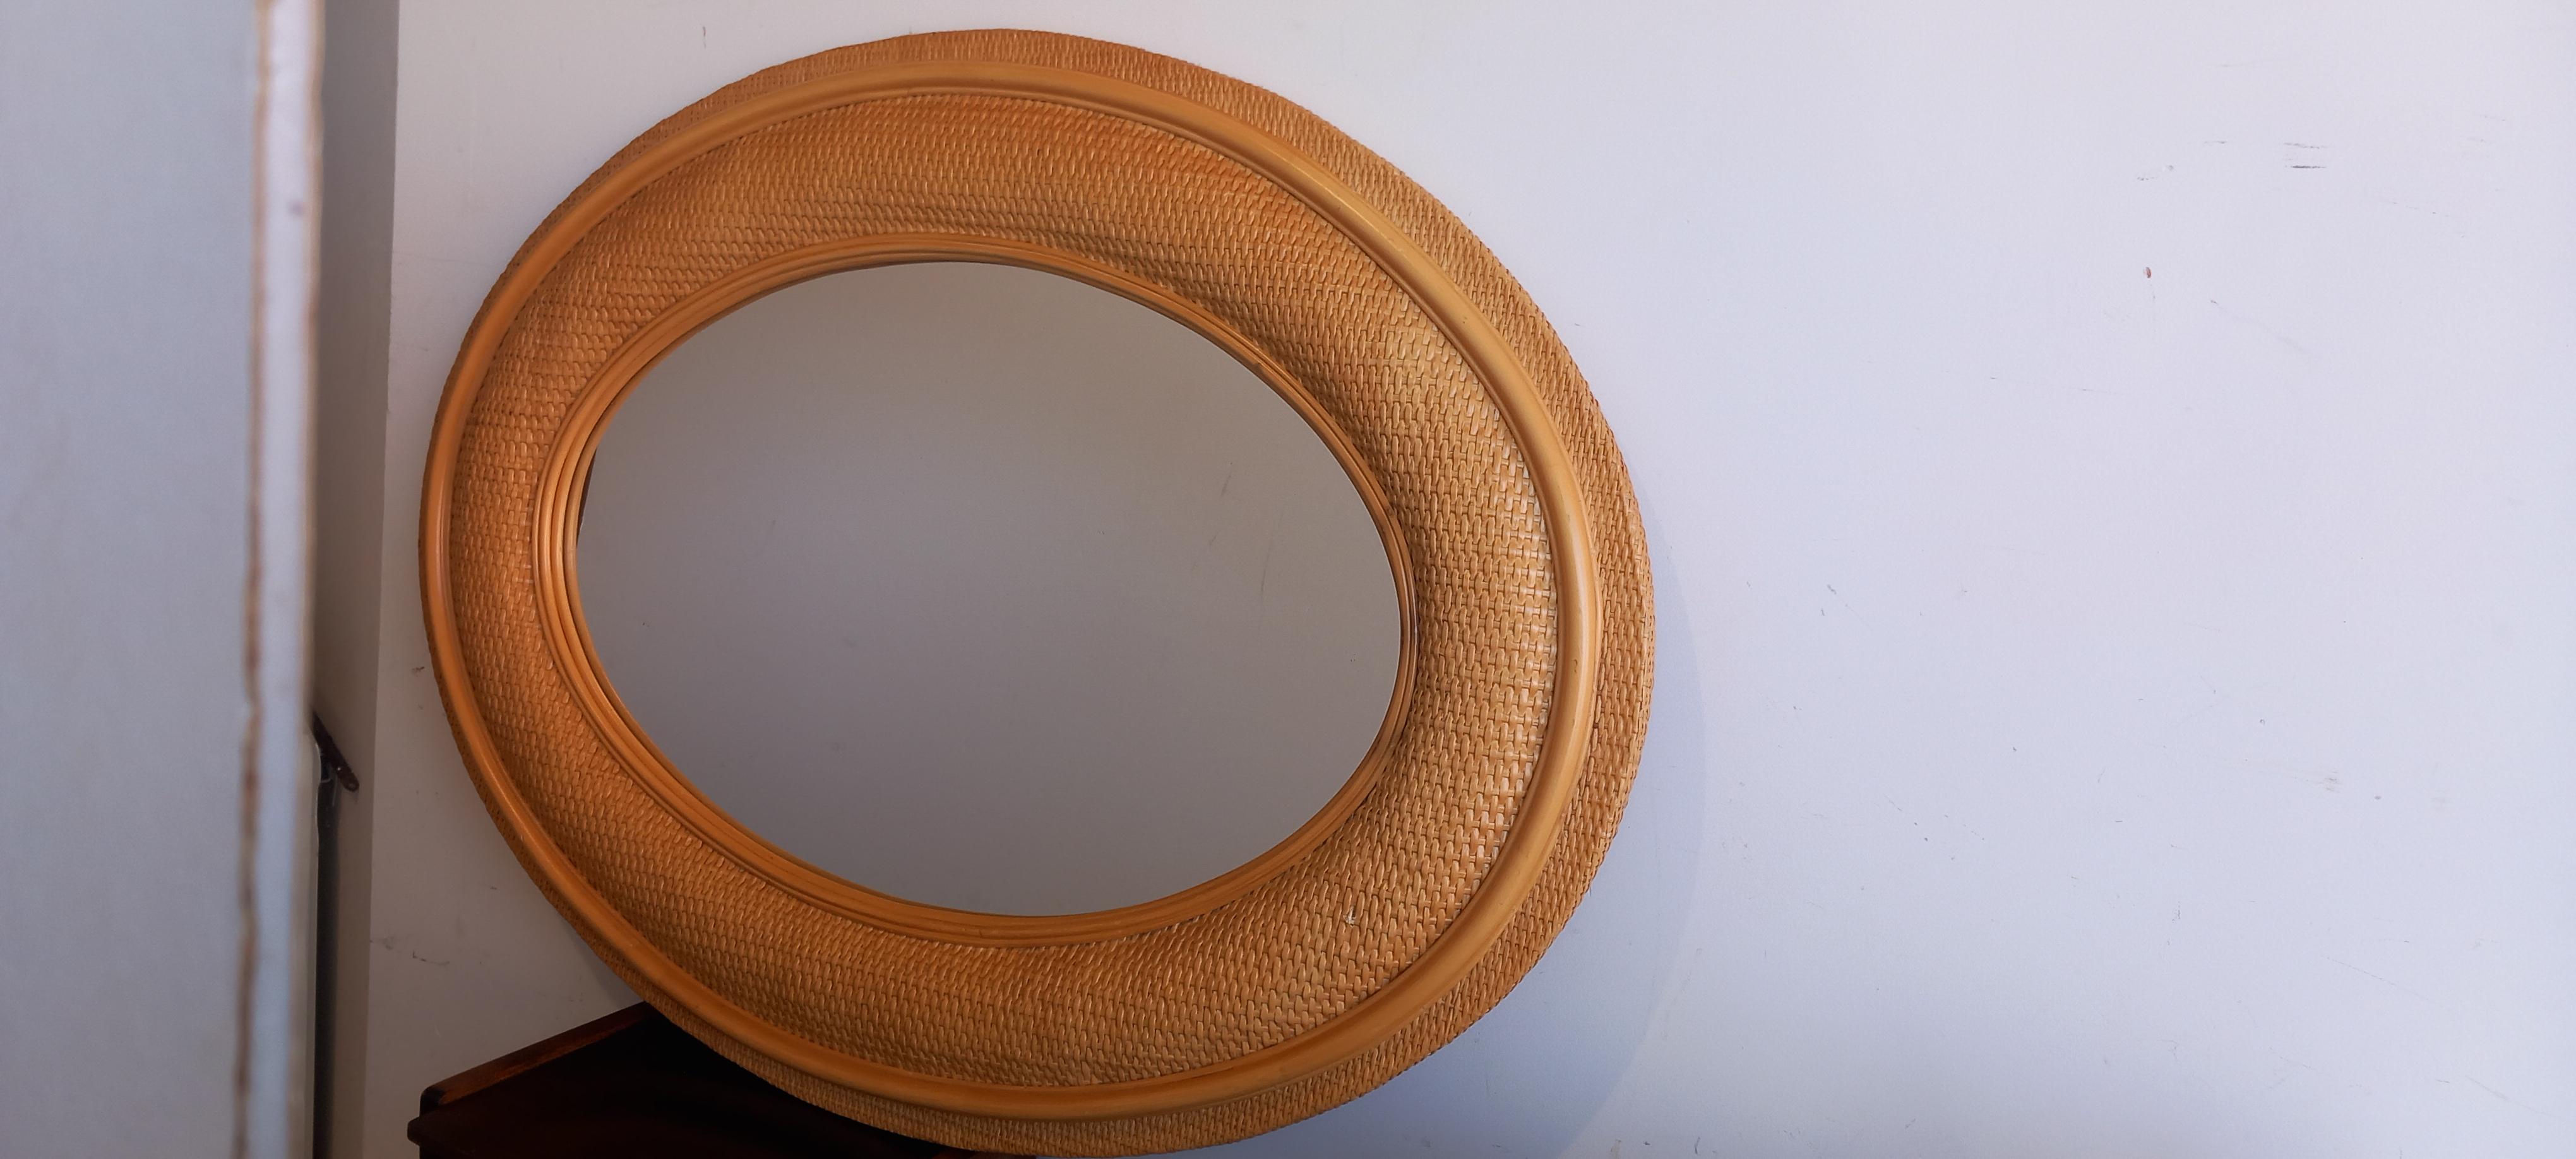 Mirrors Rattan Rare Extra Large Oval  Mid-20th  Century  Vertical or Horizontal  For Sale 7